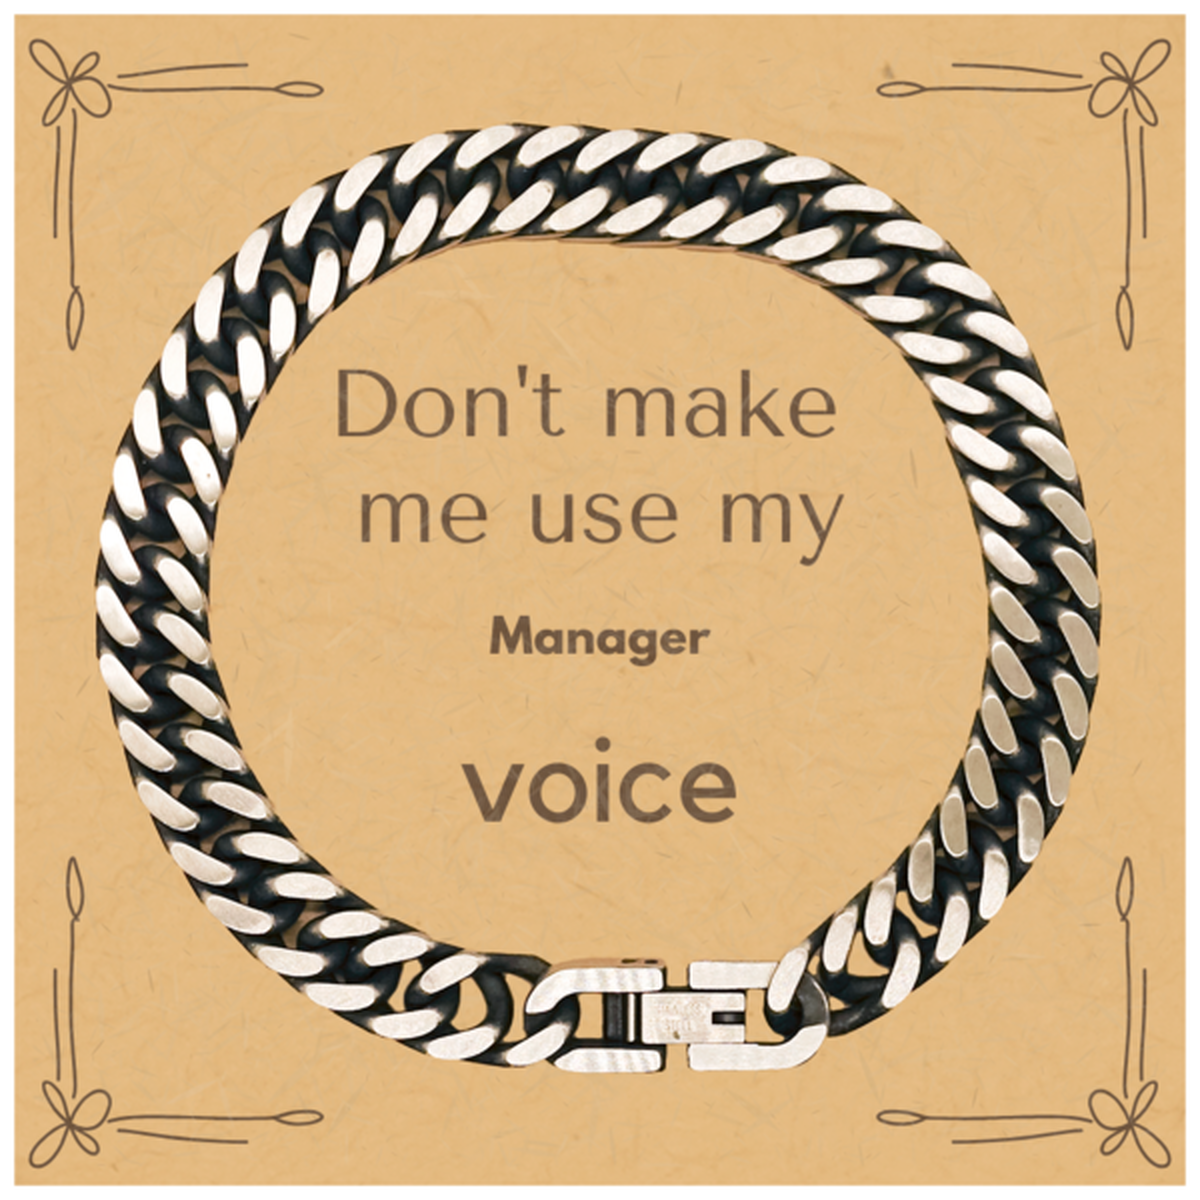 Don't make me use my Manager voice, Sarcasm Manager Card Gifts, Christmas Manager Cuban Link Chain Bracelet Birthday Unique Gifts For Manager Coworkers, Men, Women, Colleague, Friends